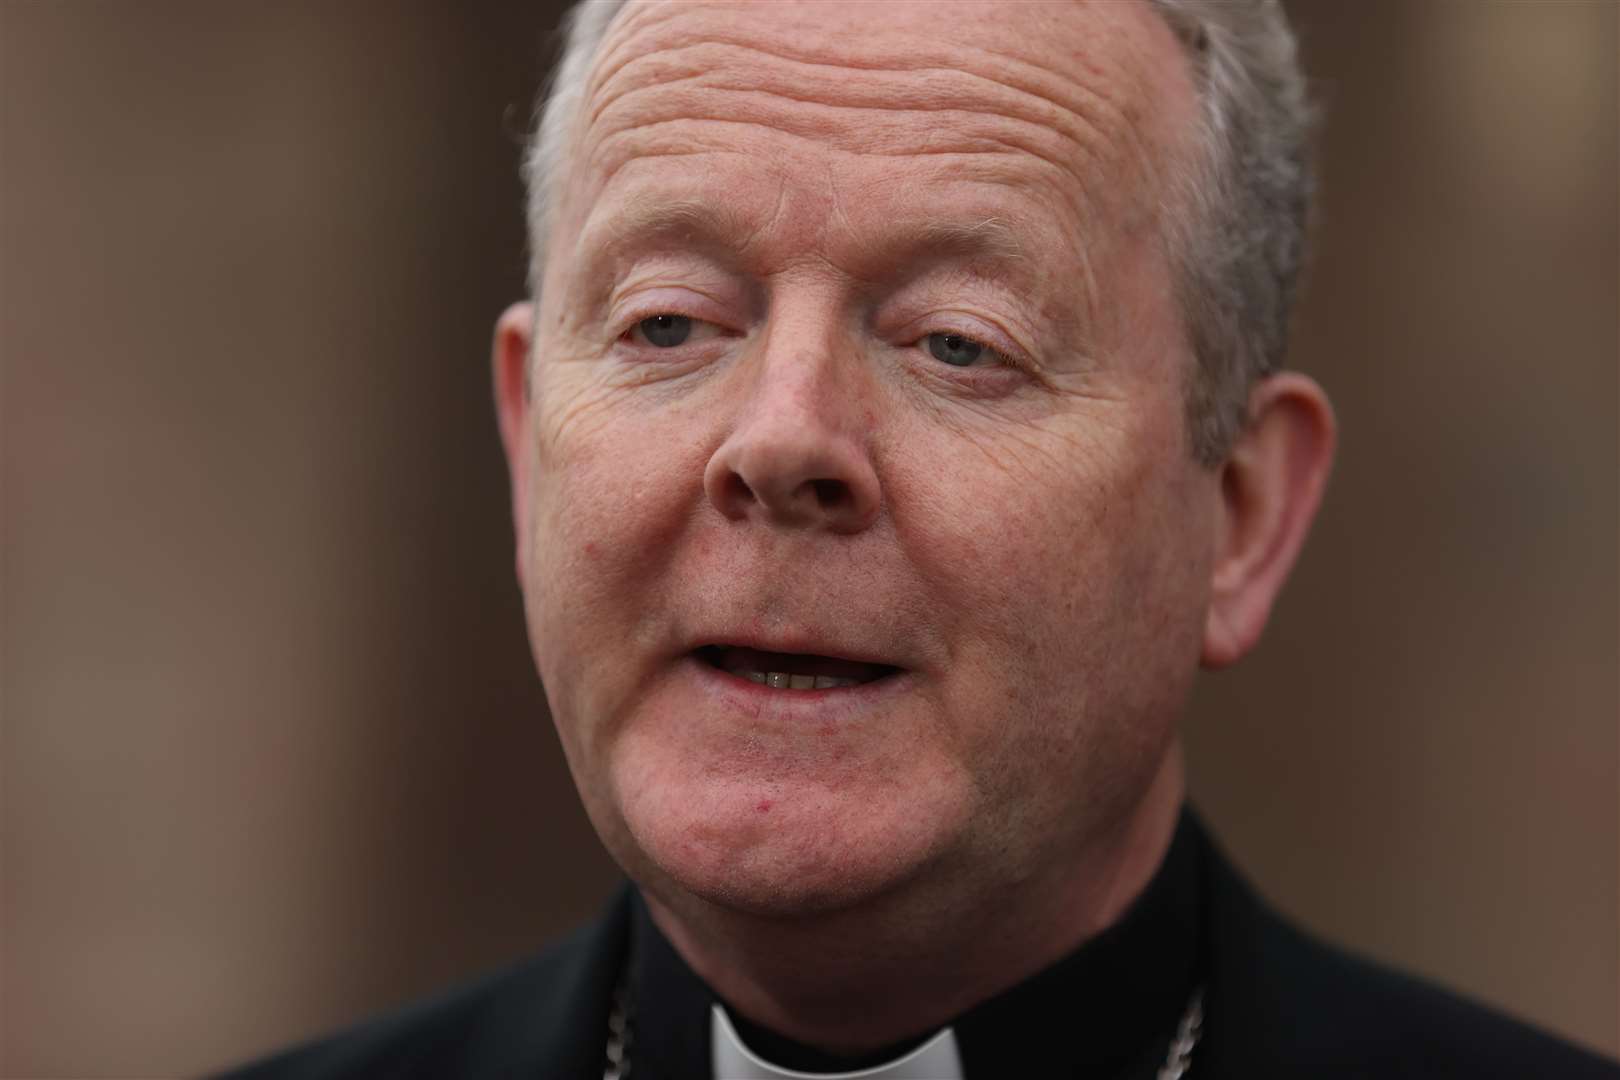 Archbishop Eamon Martin said he had spoken to the Chief Constable about the data leak (Liam McBurney/PA)